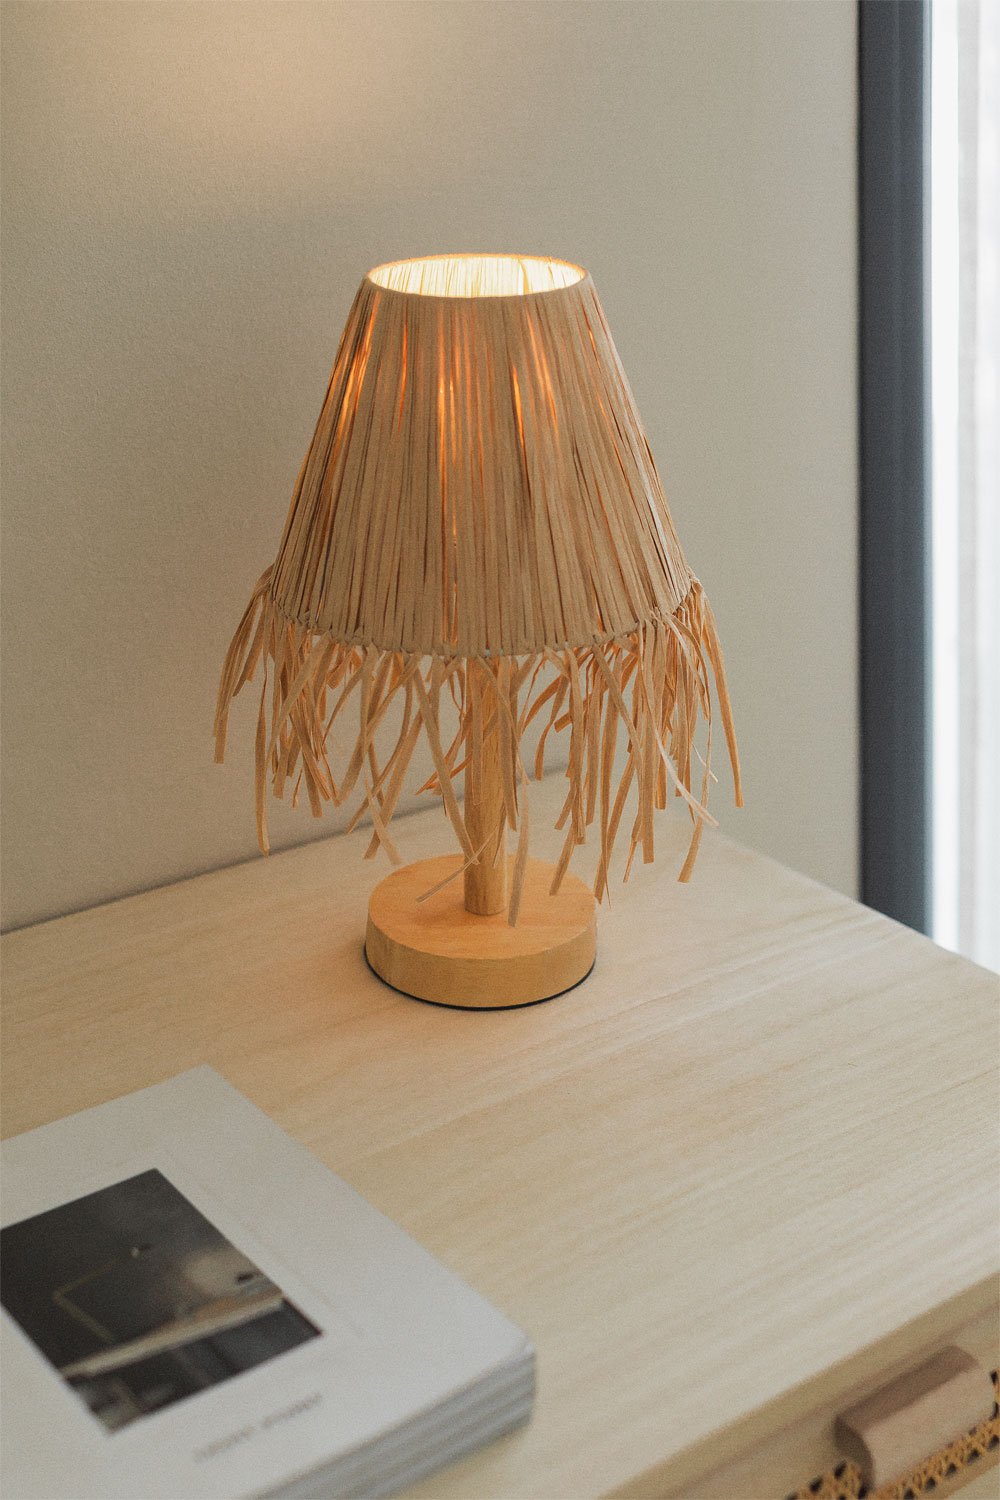 Nozaine Wireless Wooden Table Lamp, gallery image 1